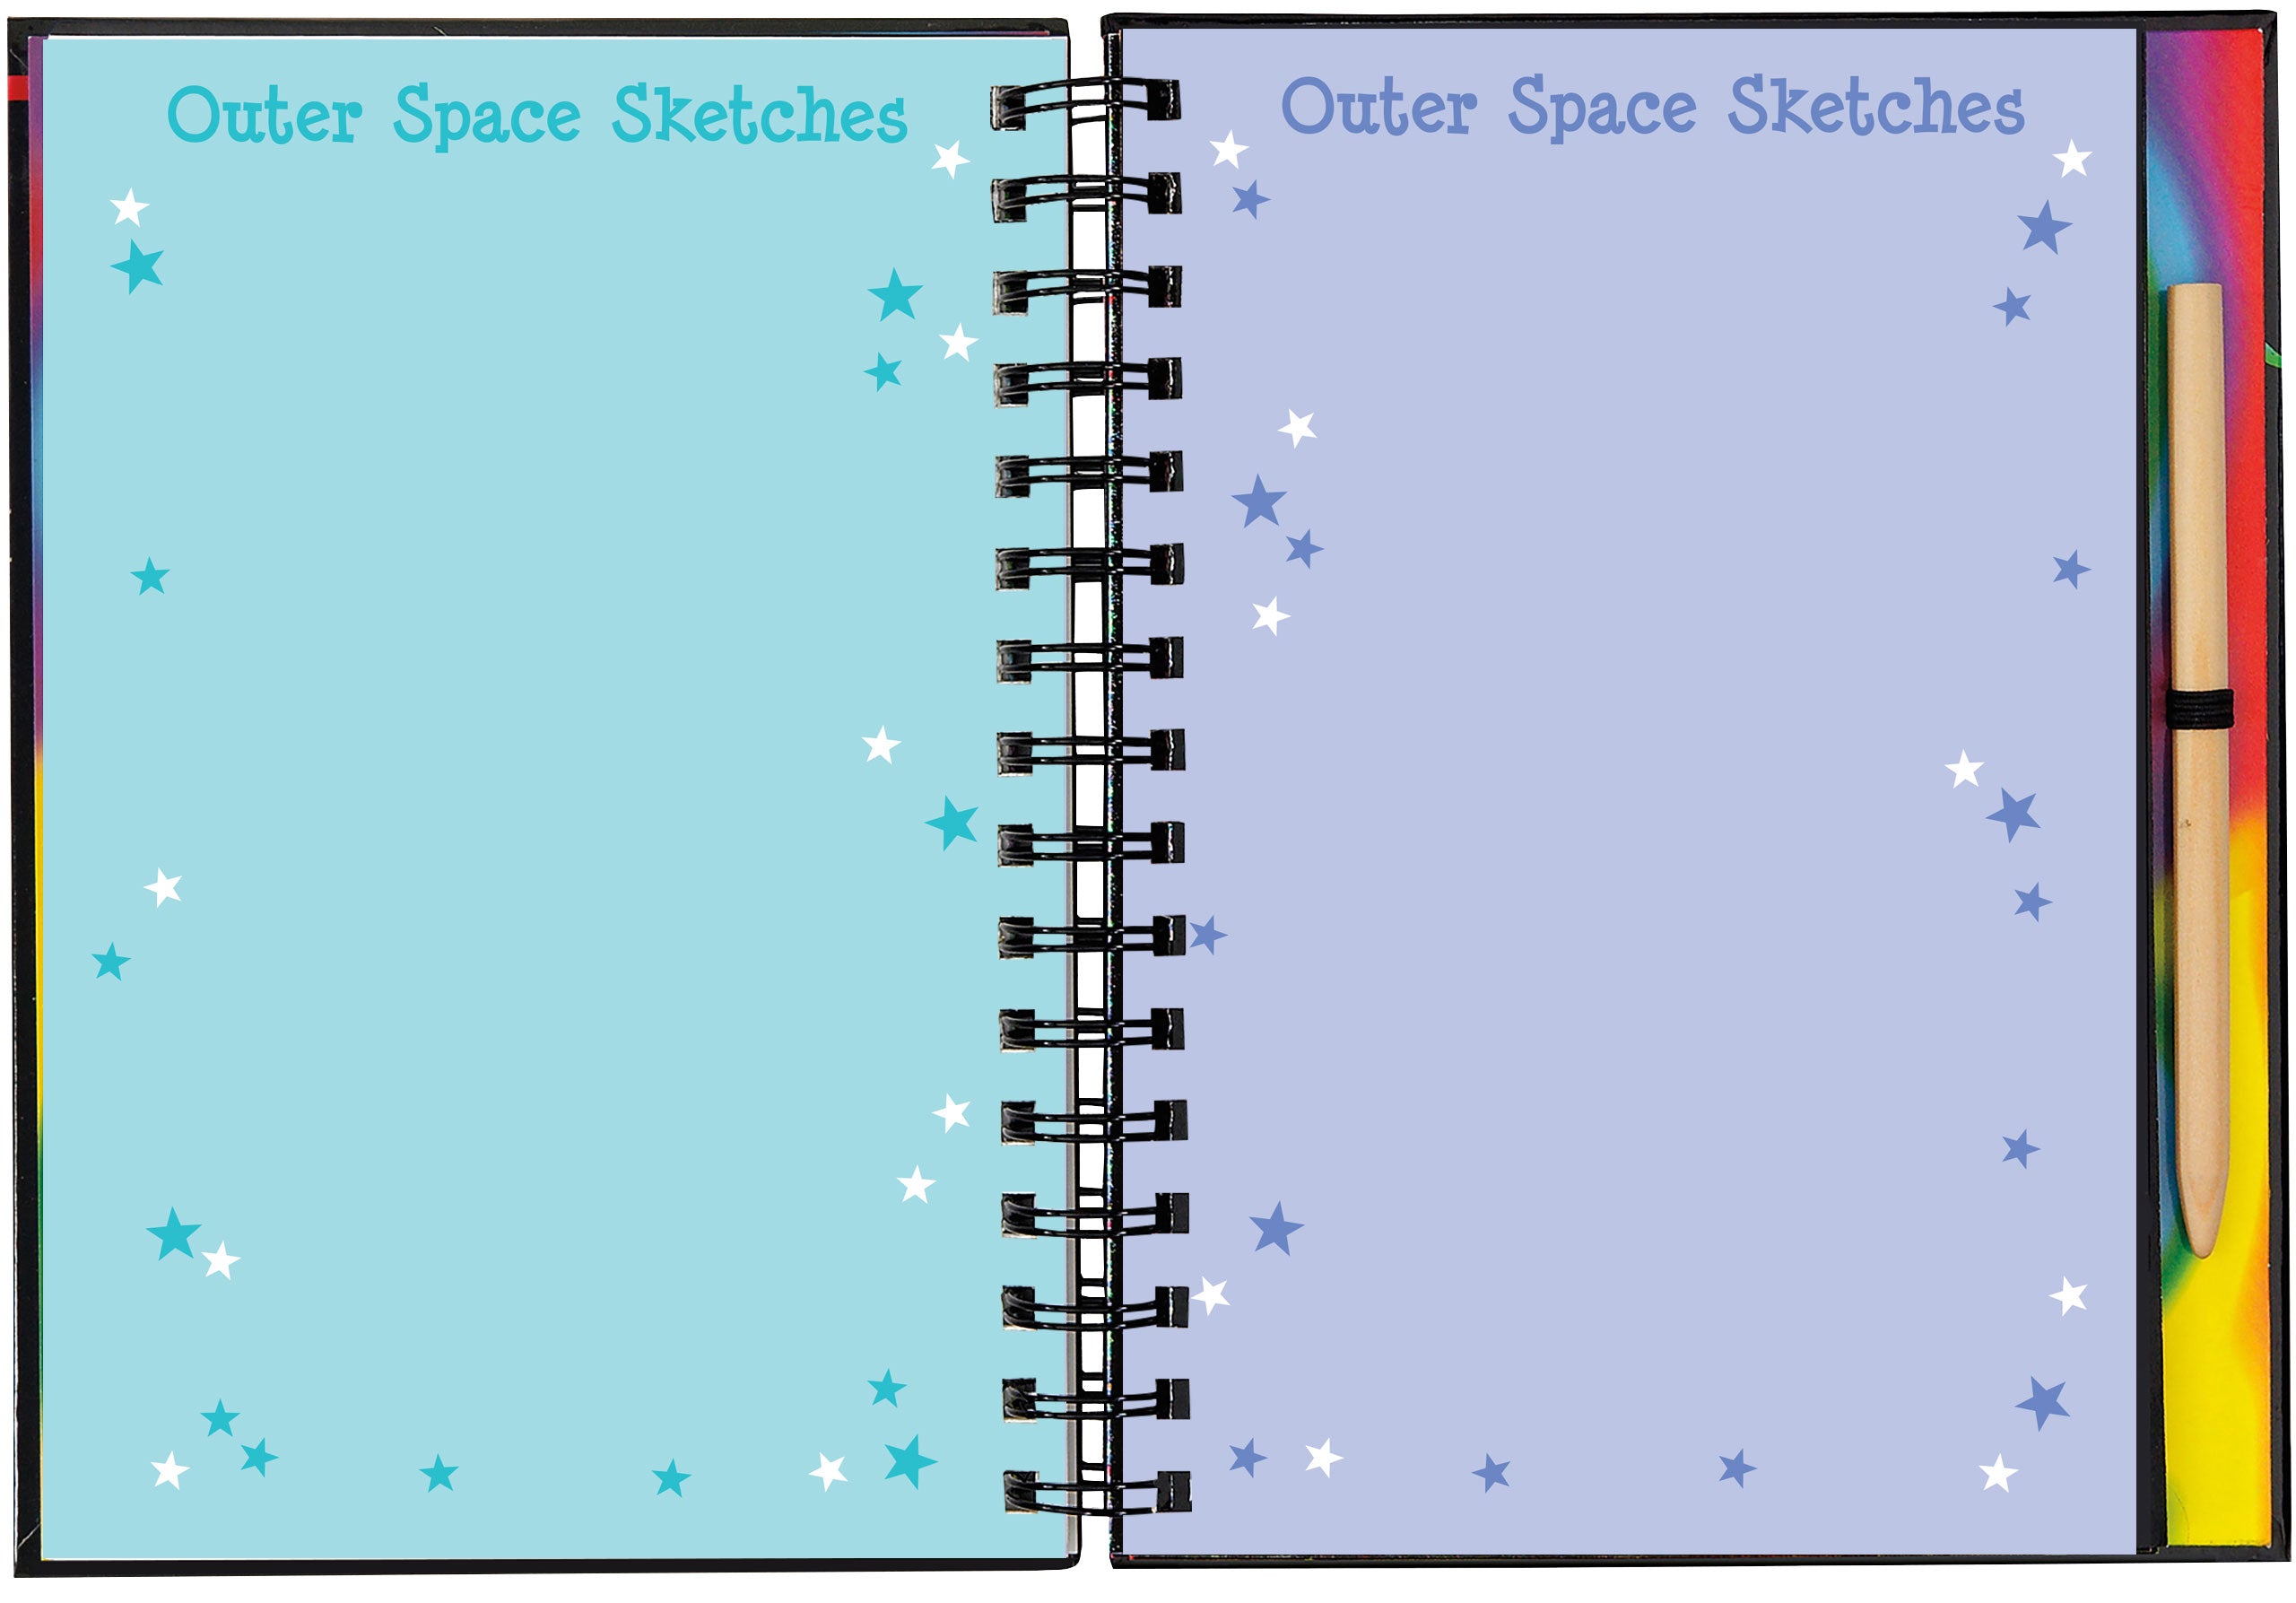 Scratch and Sketch | Outer Space Kaboodles Toy Store - Victoria